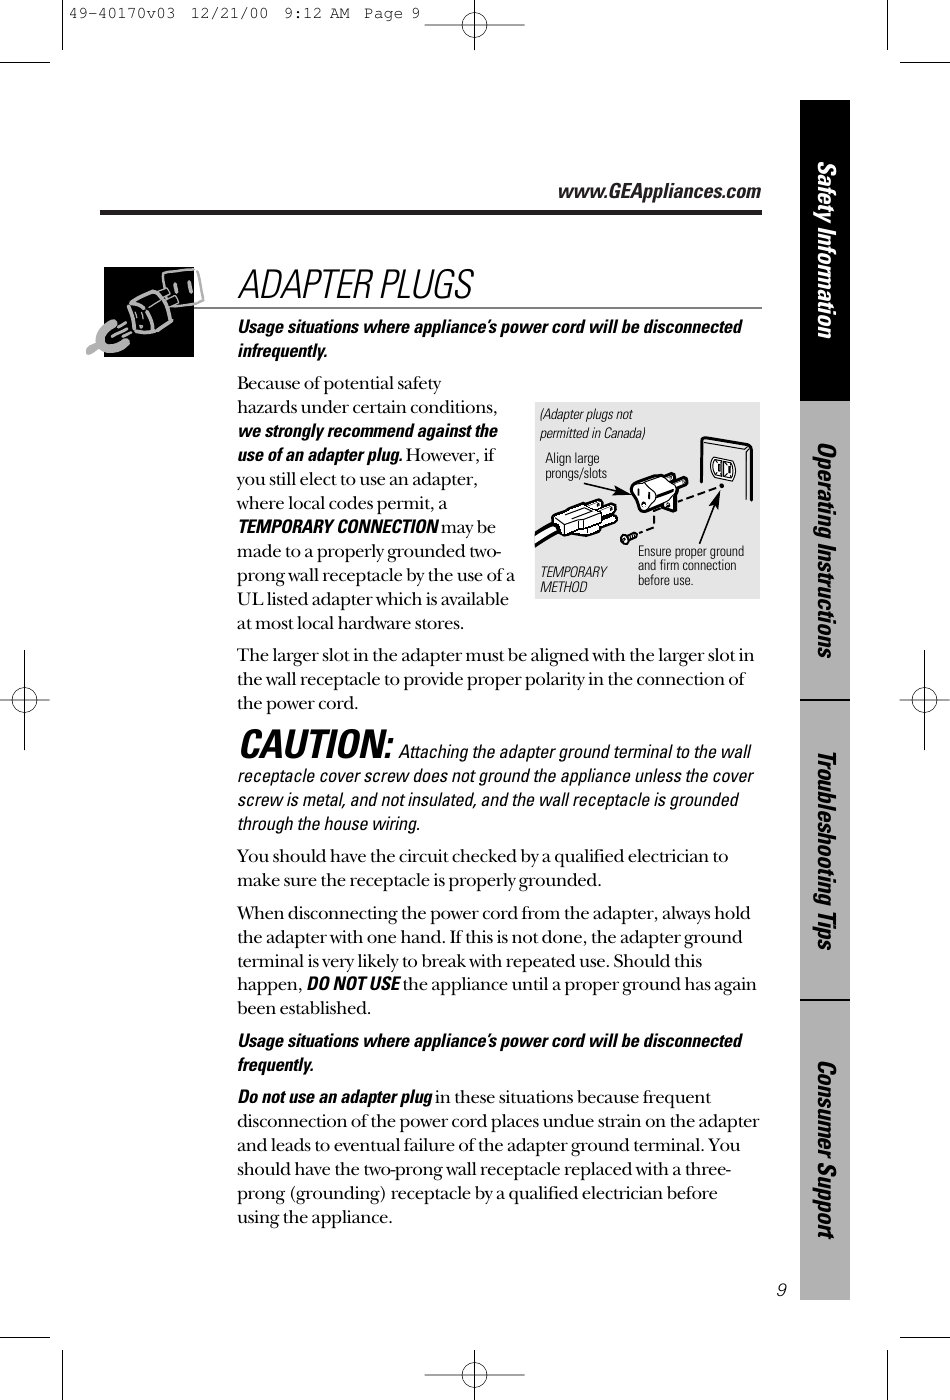 www.GEAppliances.comConsumer SupportTroubleshooting TipsOperating InstructionsSafety InformationUsage situations where appliance’s power cord will be disconnectedinfrequently.Because of potential safety hazards under certain conditions,we strongly recommend against the use of an adapter plug.However, if you still elect to use an adapter, where local codes permit, aTEMPORARY CONNECTIONmay bemade to a properly grounded two-prong wall receptacle by the use of aUL listed adapter which is available at most local hardware stores.The larger slot in the adapter must be aligned with the larger slot inthe wall receptacle to provide proper polarity in the connection ofthe power cord.CAUTION:Attaching the adapter ground terminal to the wallreceptacle cover screw does not ground the appliance unless the coverscrew is metal, and not insulated, and the wall receptacle is groundedthrough the house wiring. You should have the circuit checked by a qualified electrician tomake sure the receptacle is properly grounded.When disconnecting the power cord from the adapter, always holdthe adapter with one hand. If this is not done, the adapter groundterminal is very likely to break with repeated use. Should thishappen, DO NOT USEthe appliance until a proper ground has againbeen established.Usage situations where appliance’s power cord will be disconnectedfrequently.Do not use an adapter plugin these situations because frequentdisconnection of the power cord places undue strain on the adapterand leads to eventual failure of the adapter ground terminal. Youshould have the two-prong wall receptacle replaced with a three-prong (grounding) receptacle by a qualified electrician beforeusing the appliance.ADAPTER PLUGS9Ensure proper ground and firm connectionbefore use.TEMPORARYMETHODAlign largeprongs/slots(Adapter plugs notpermitted in Canada)49-40170v03  12/21/00  9:12 AM  Page 9